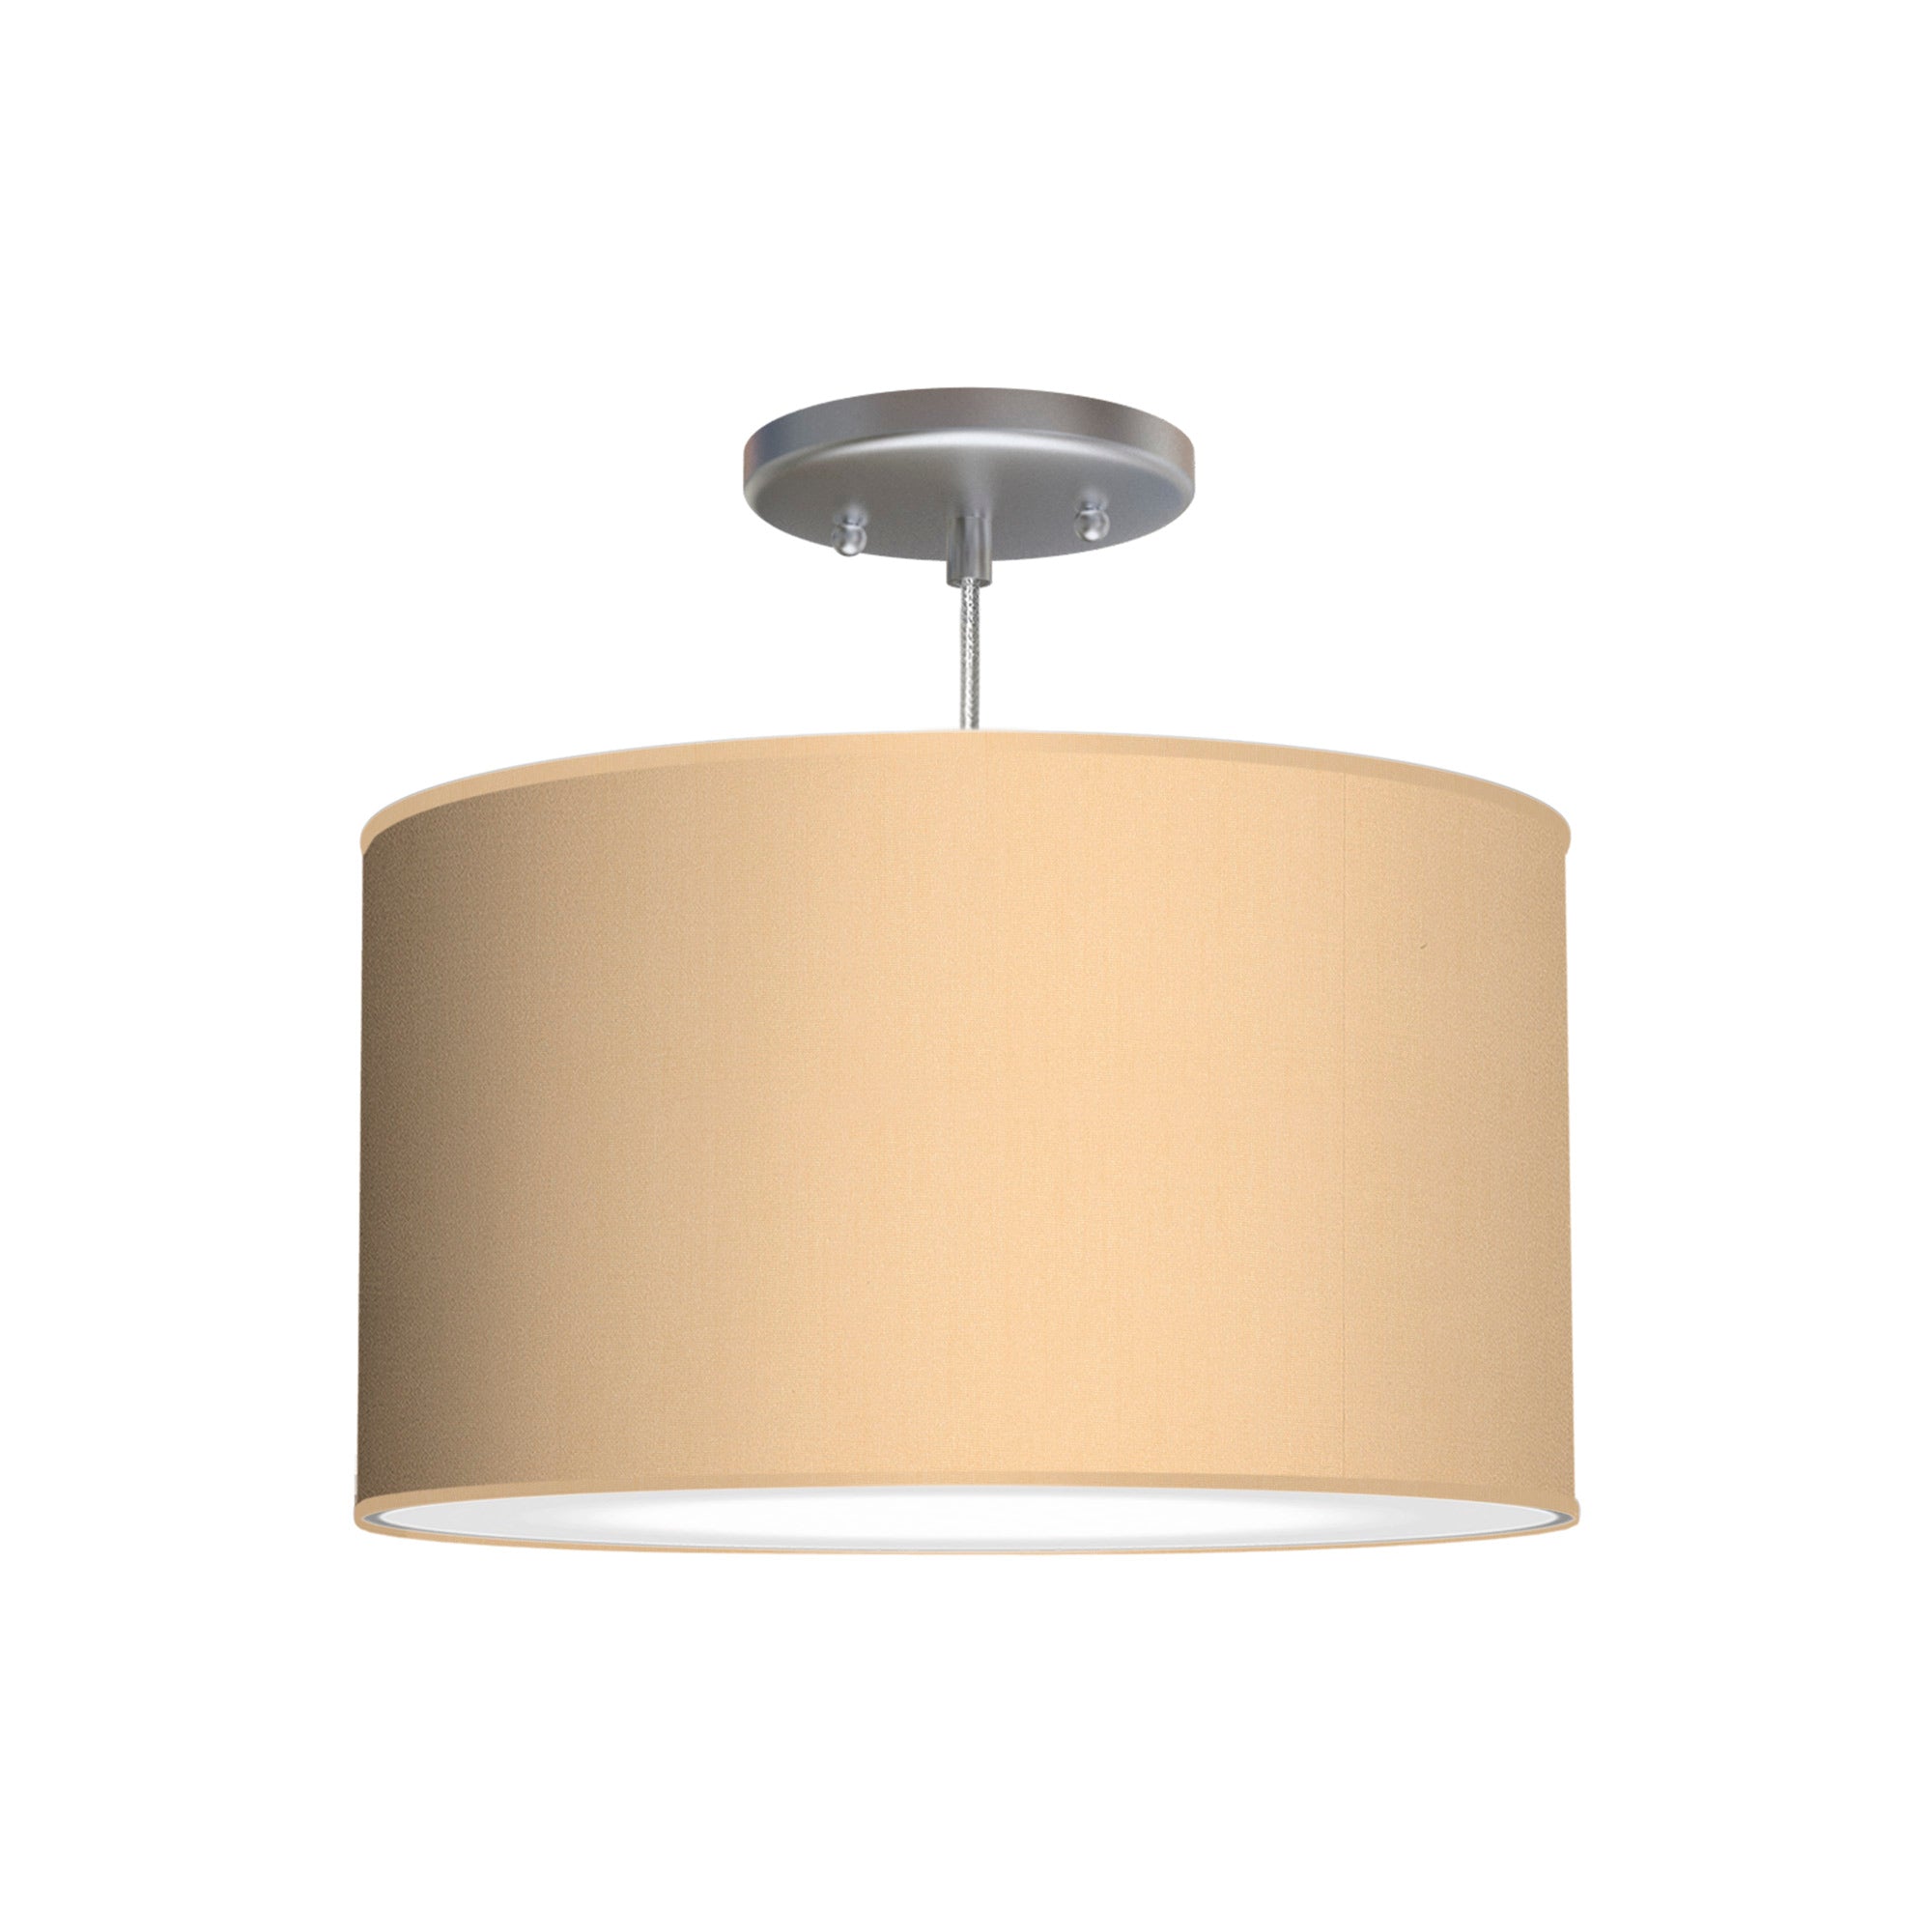 The Gab Hanging Lamp from Seascape Fixtures with a silk shade in champagne color.